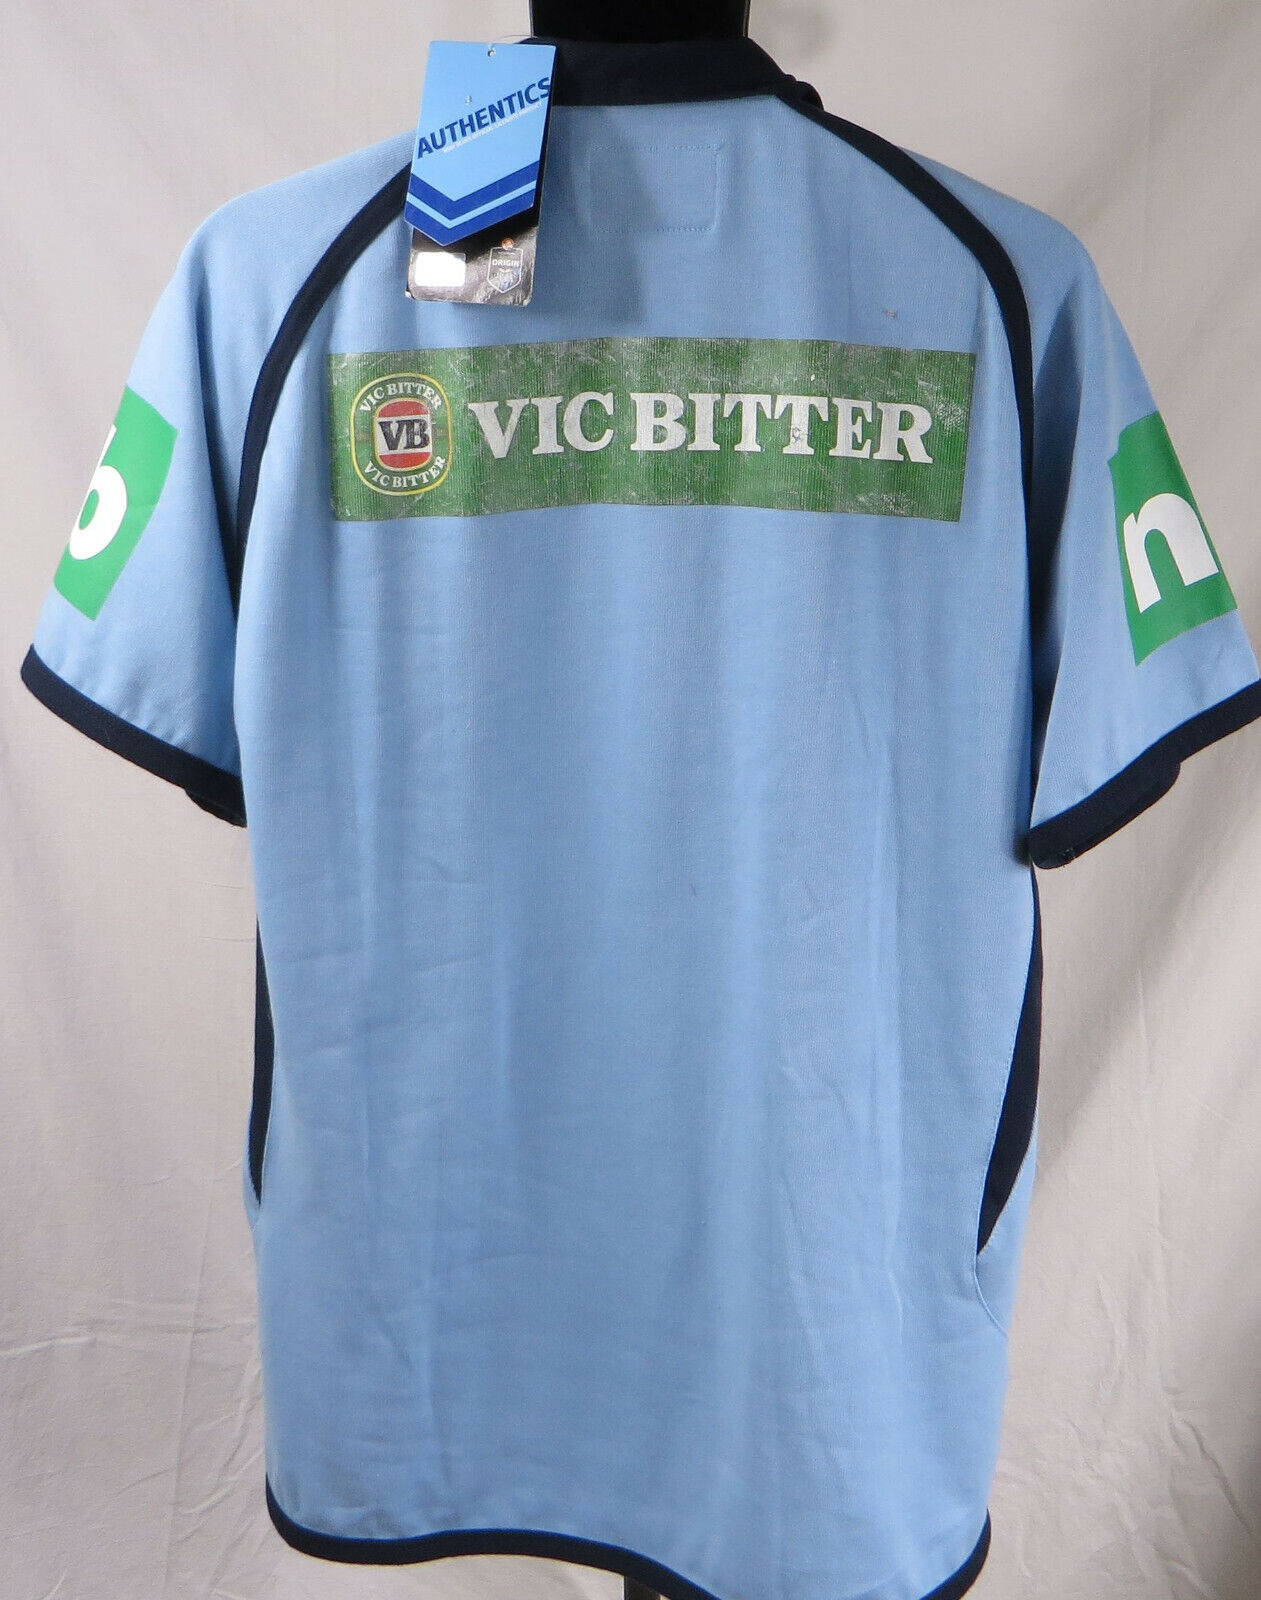 Mens NOS 2009 Authentics NSW Blues Holden Jersey w/ tags Vic Bitter Size Large  NSW Does Not Apply - фотография #5